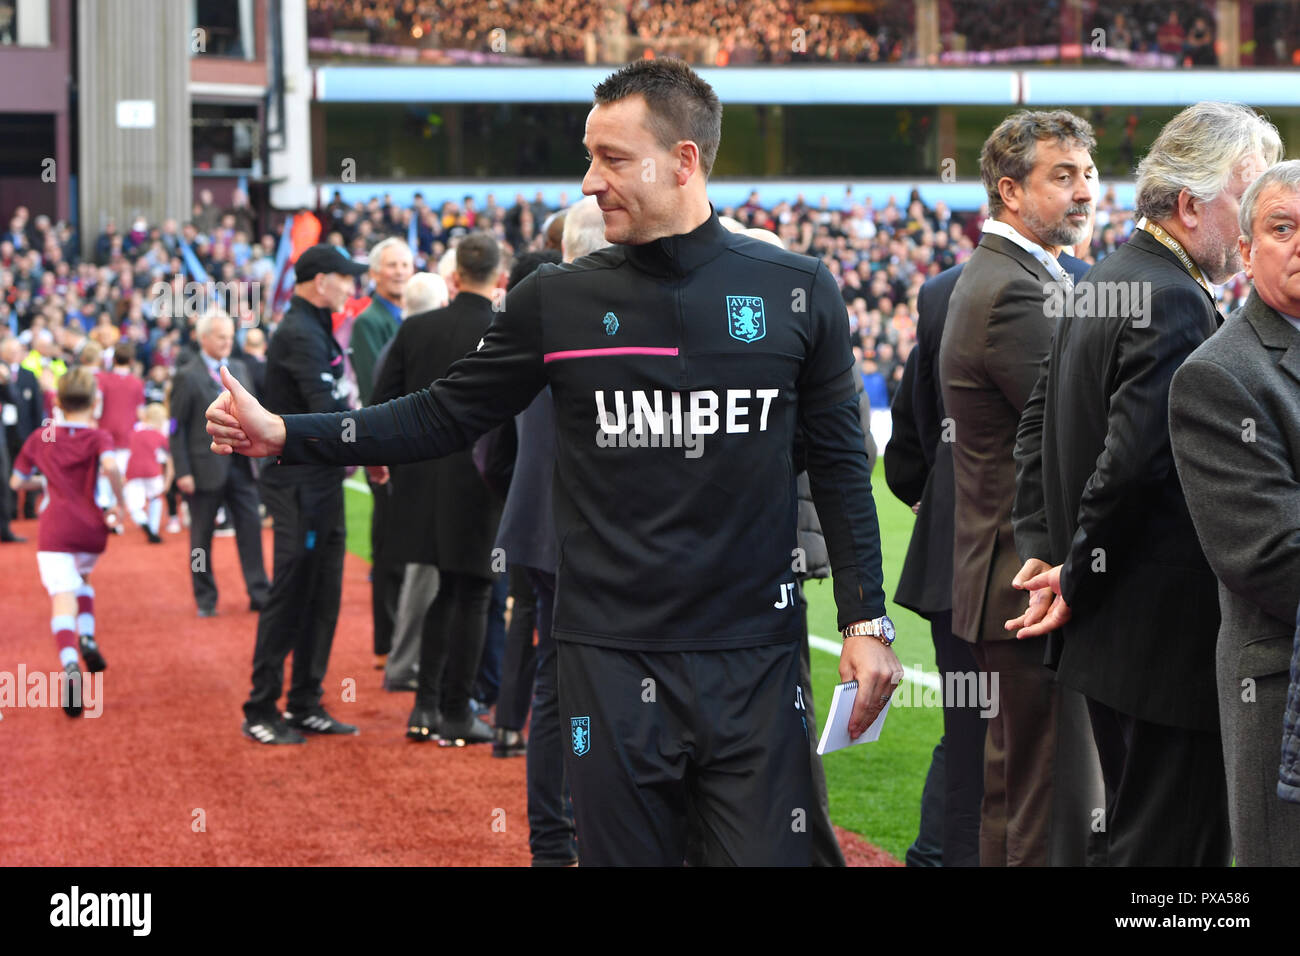 Aston Villa Coach High Resolution Stock Photography and Images - Alamy